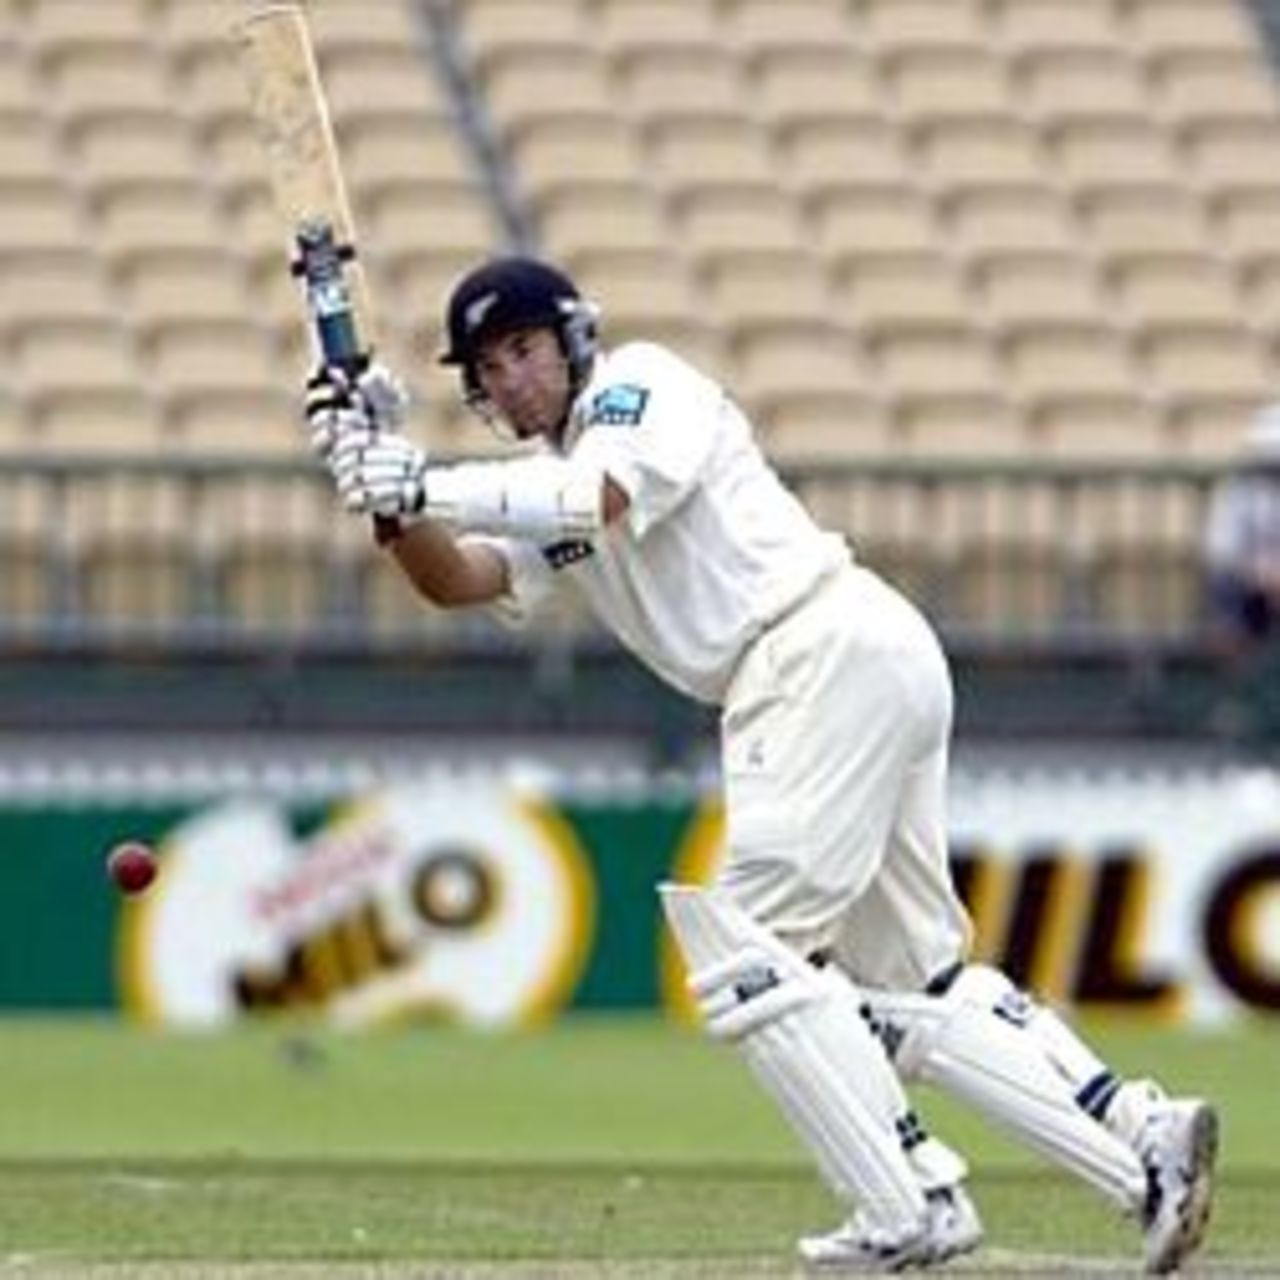 17 Nov 2001: Acting NZ captain Craig McMillan in action in the match between South Australia and New Zealand played at Adelaide Oval in Adelaide, Australia.